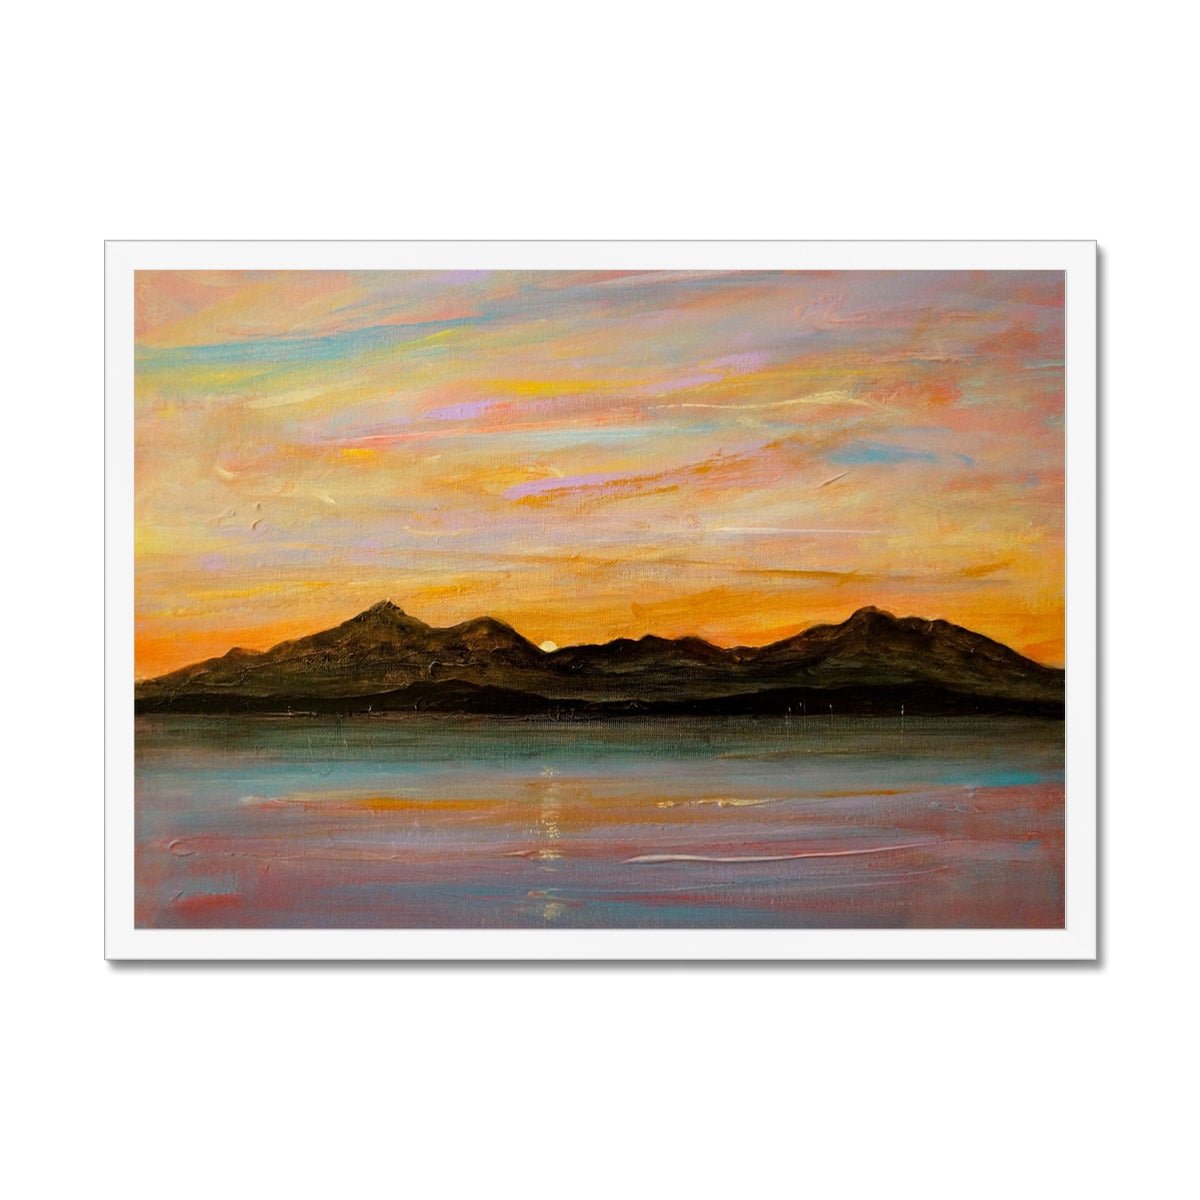 The Sleeping Warrior Arran Painting | Framed Prints From Scotland-Framed Prints-Arran Art Gallery-A2 Landscape-White Frame-Paintings, Prints, Homeware, Art Gifts From Scotland By Scottish Artist Kevin Hunter